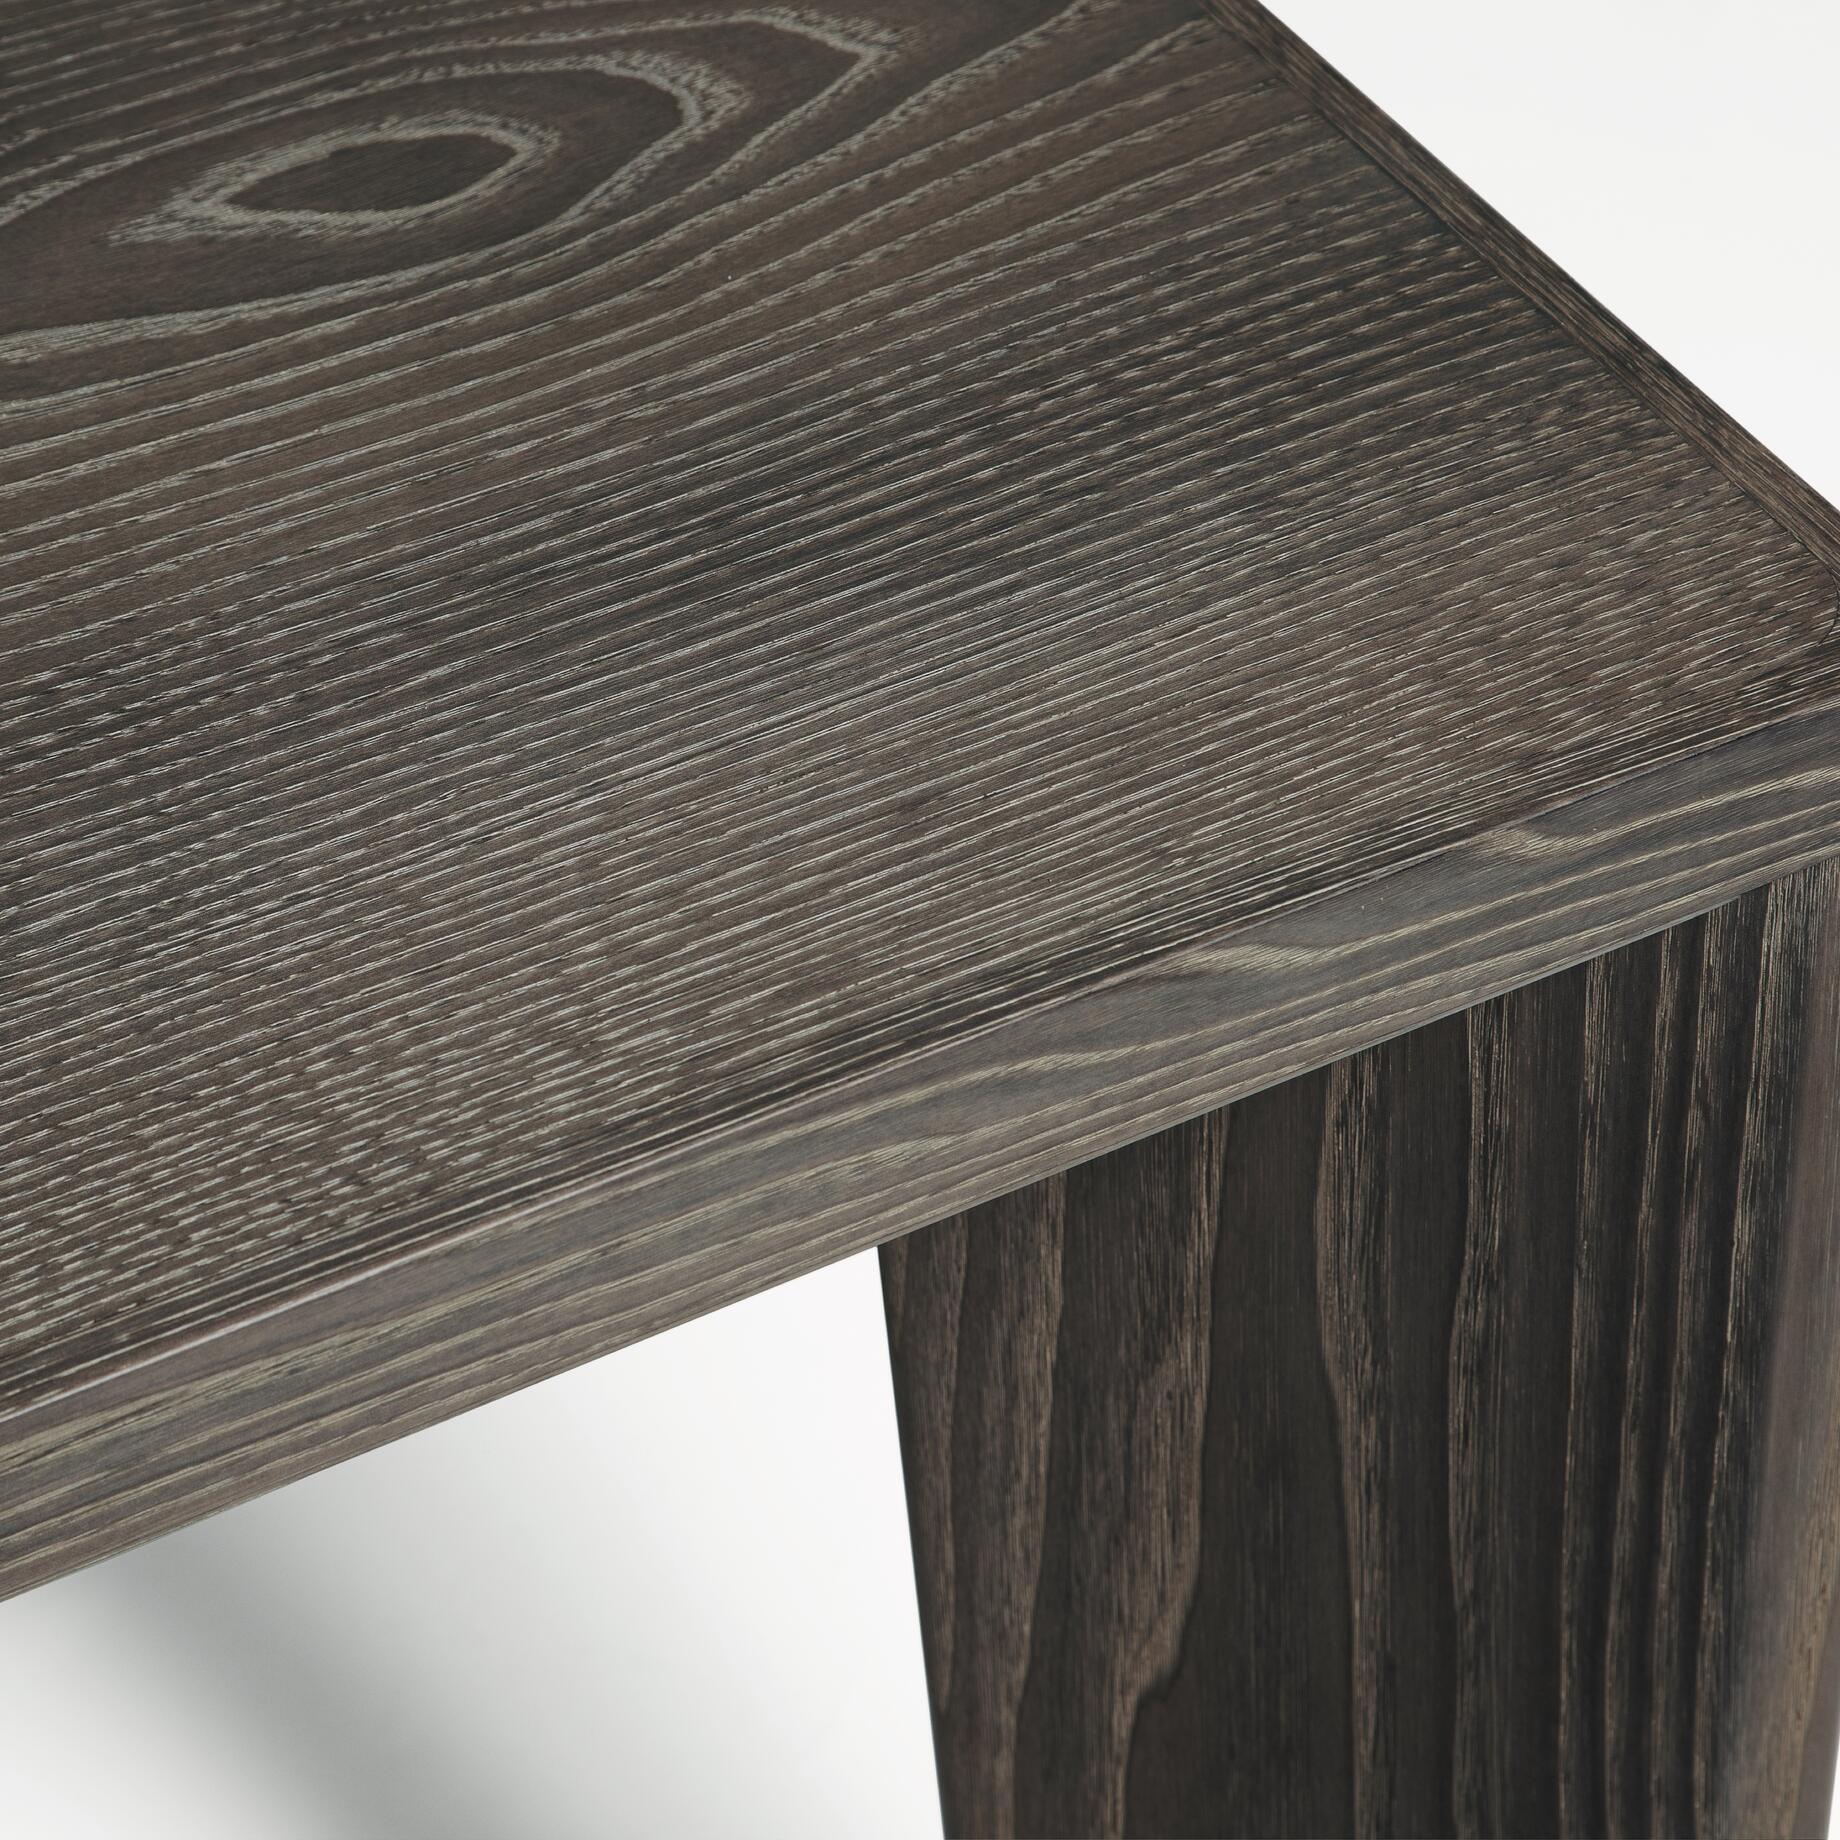 Keel Dining Table